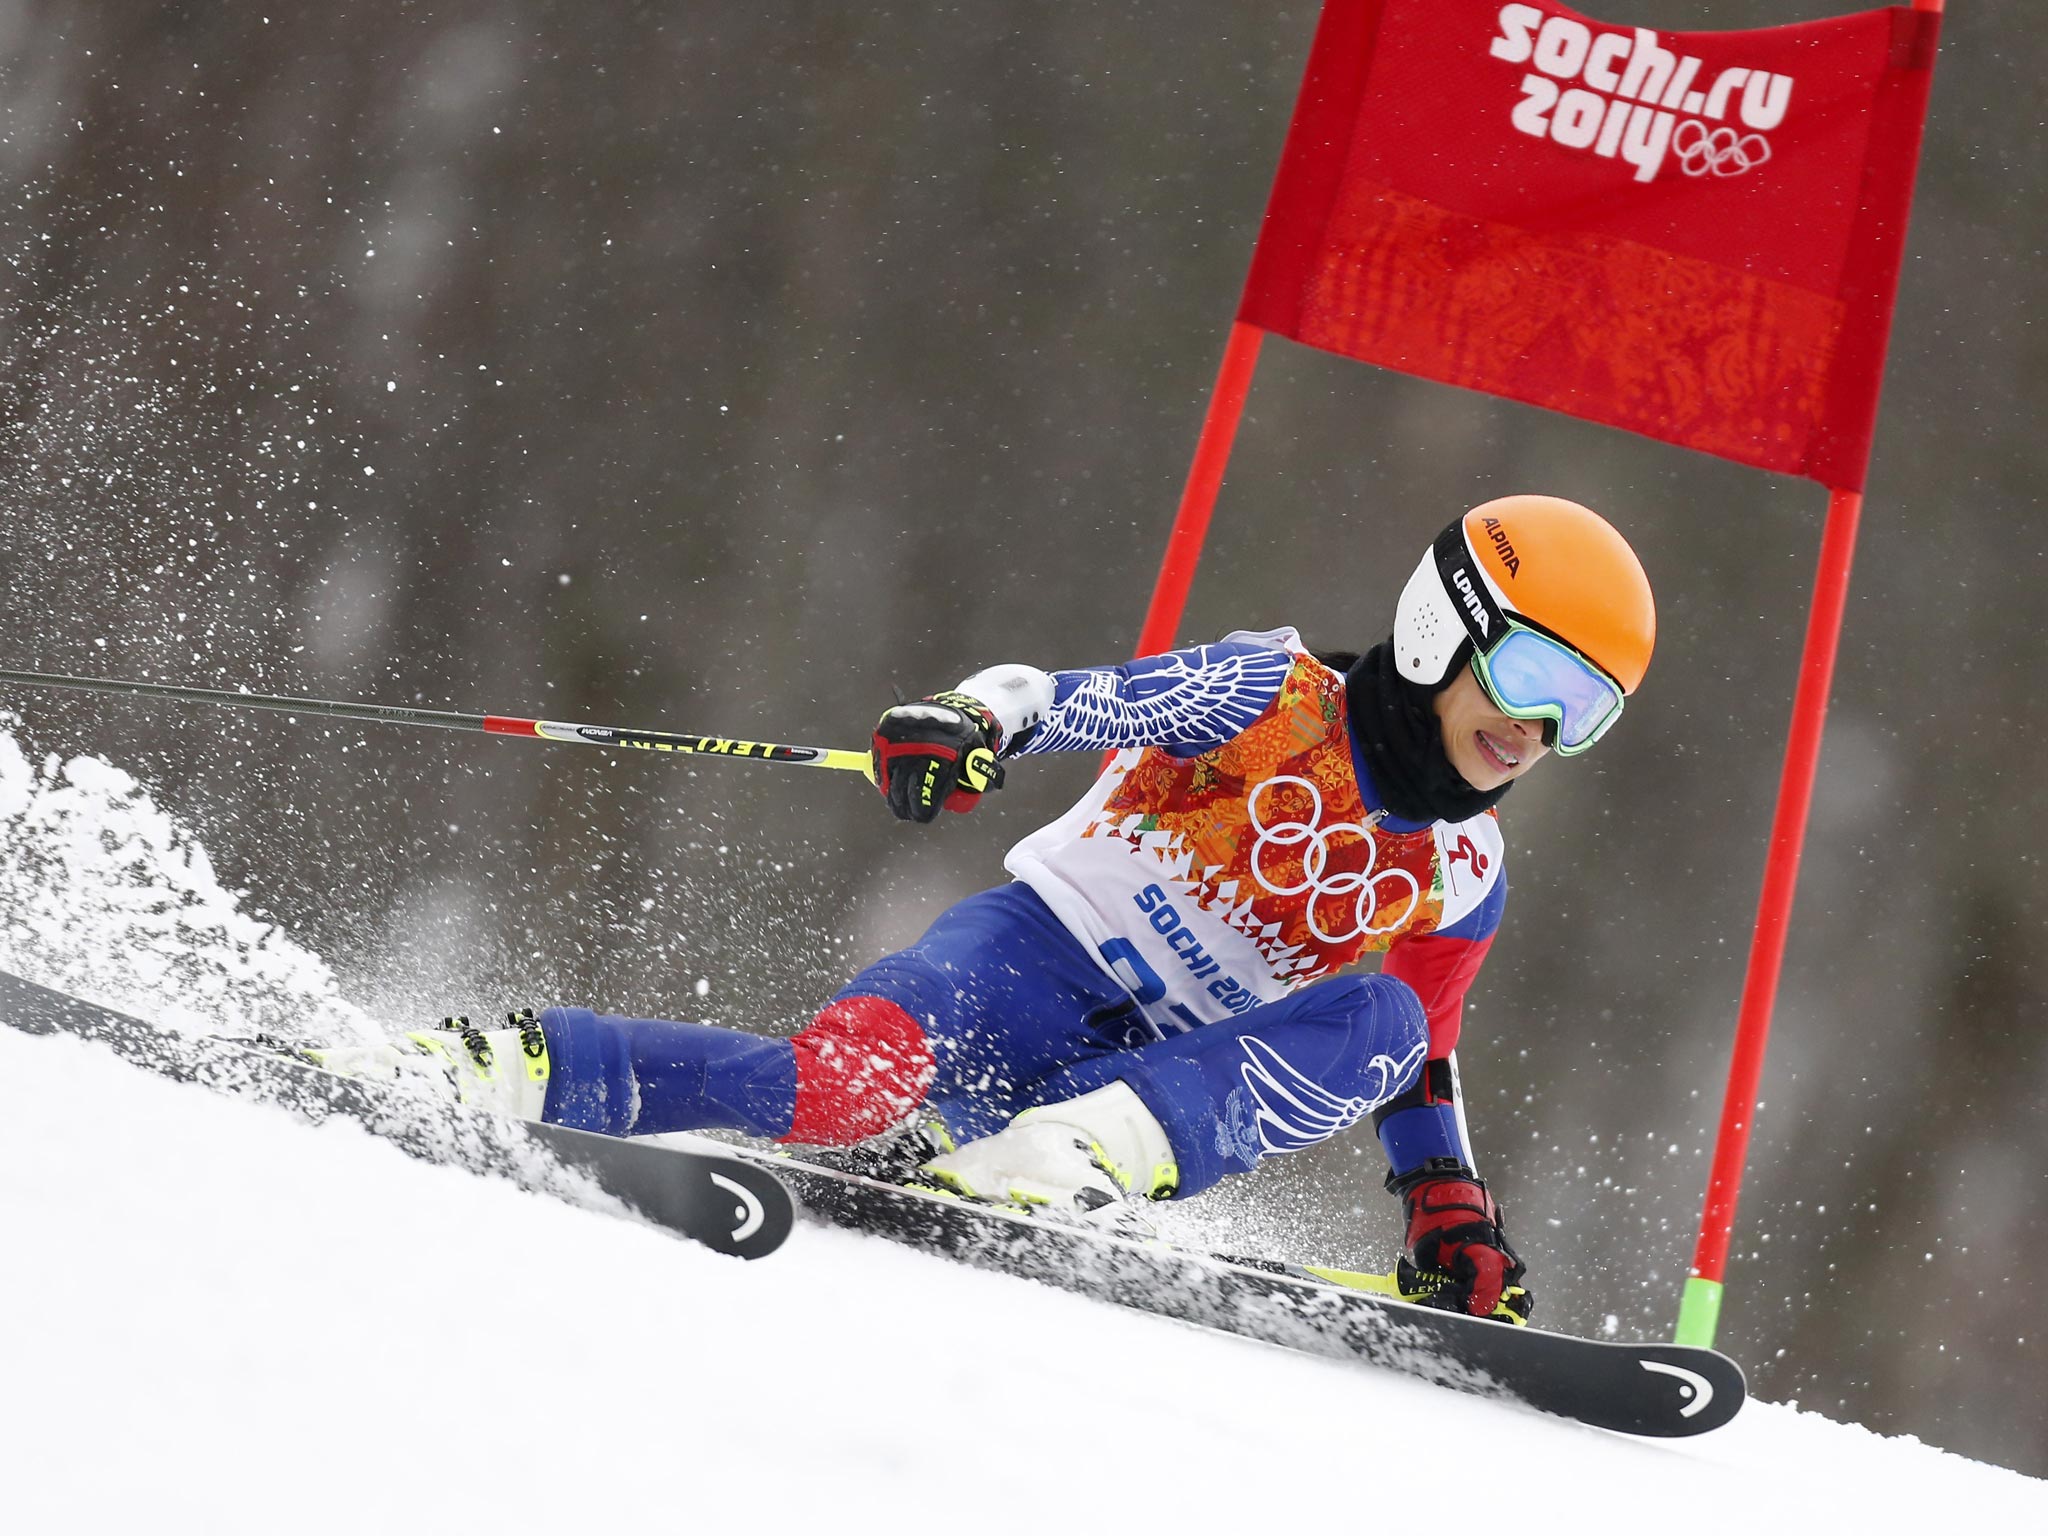 Even though Vanessa-Mae came last, her participation in the giant slalom was entirely in keeping with Olympic ideals